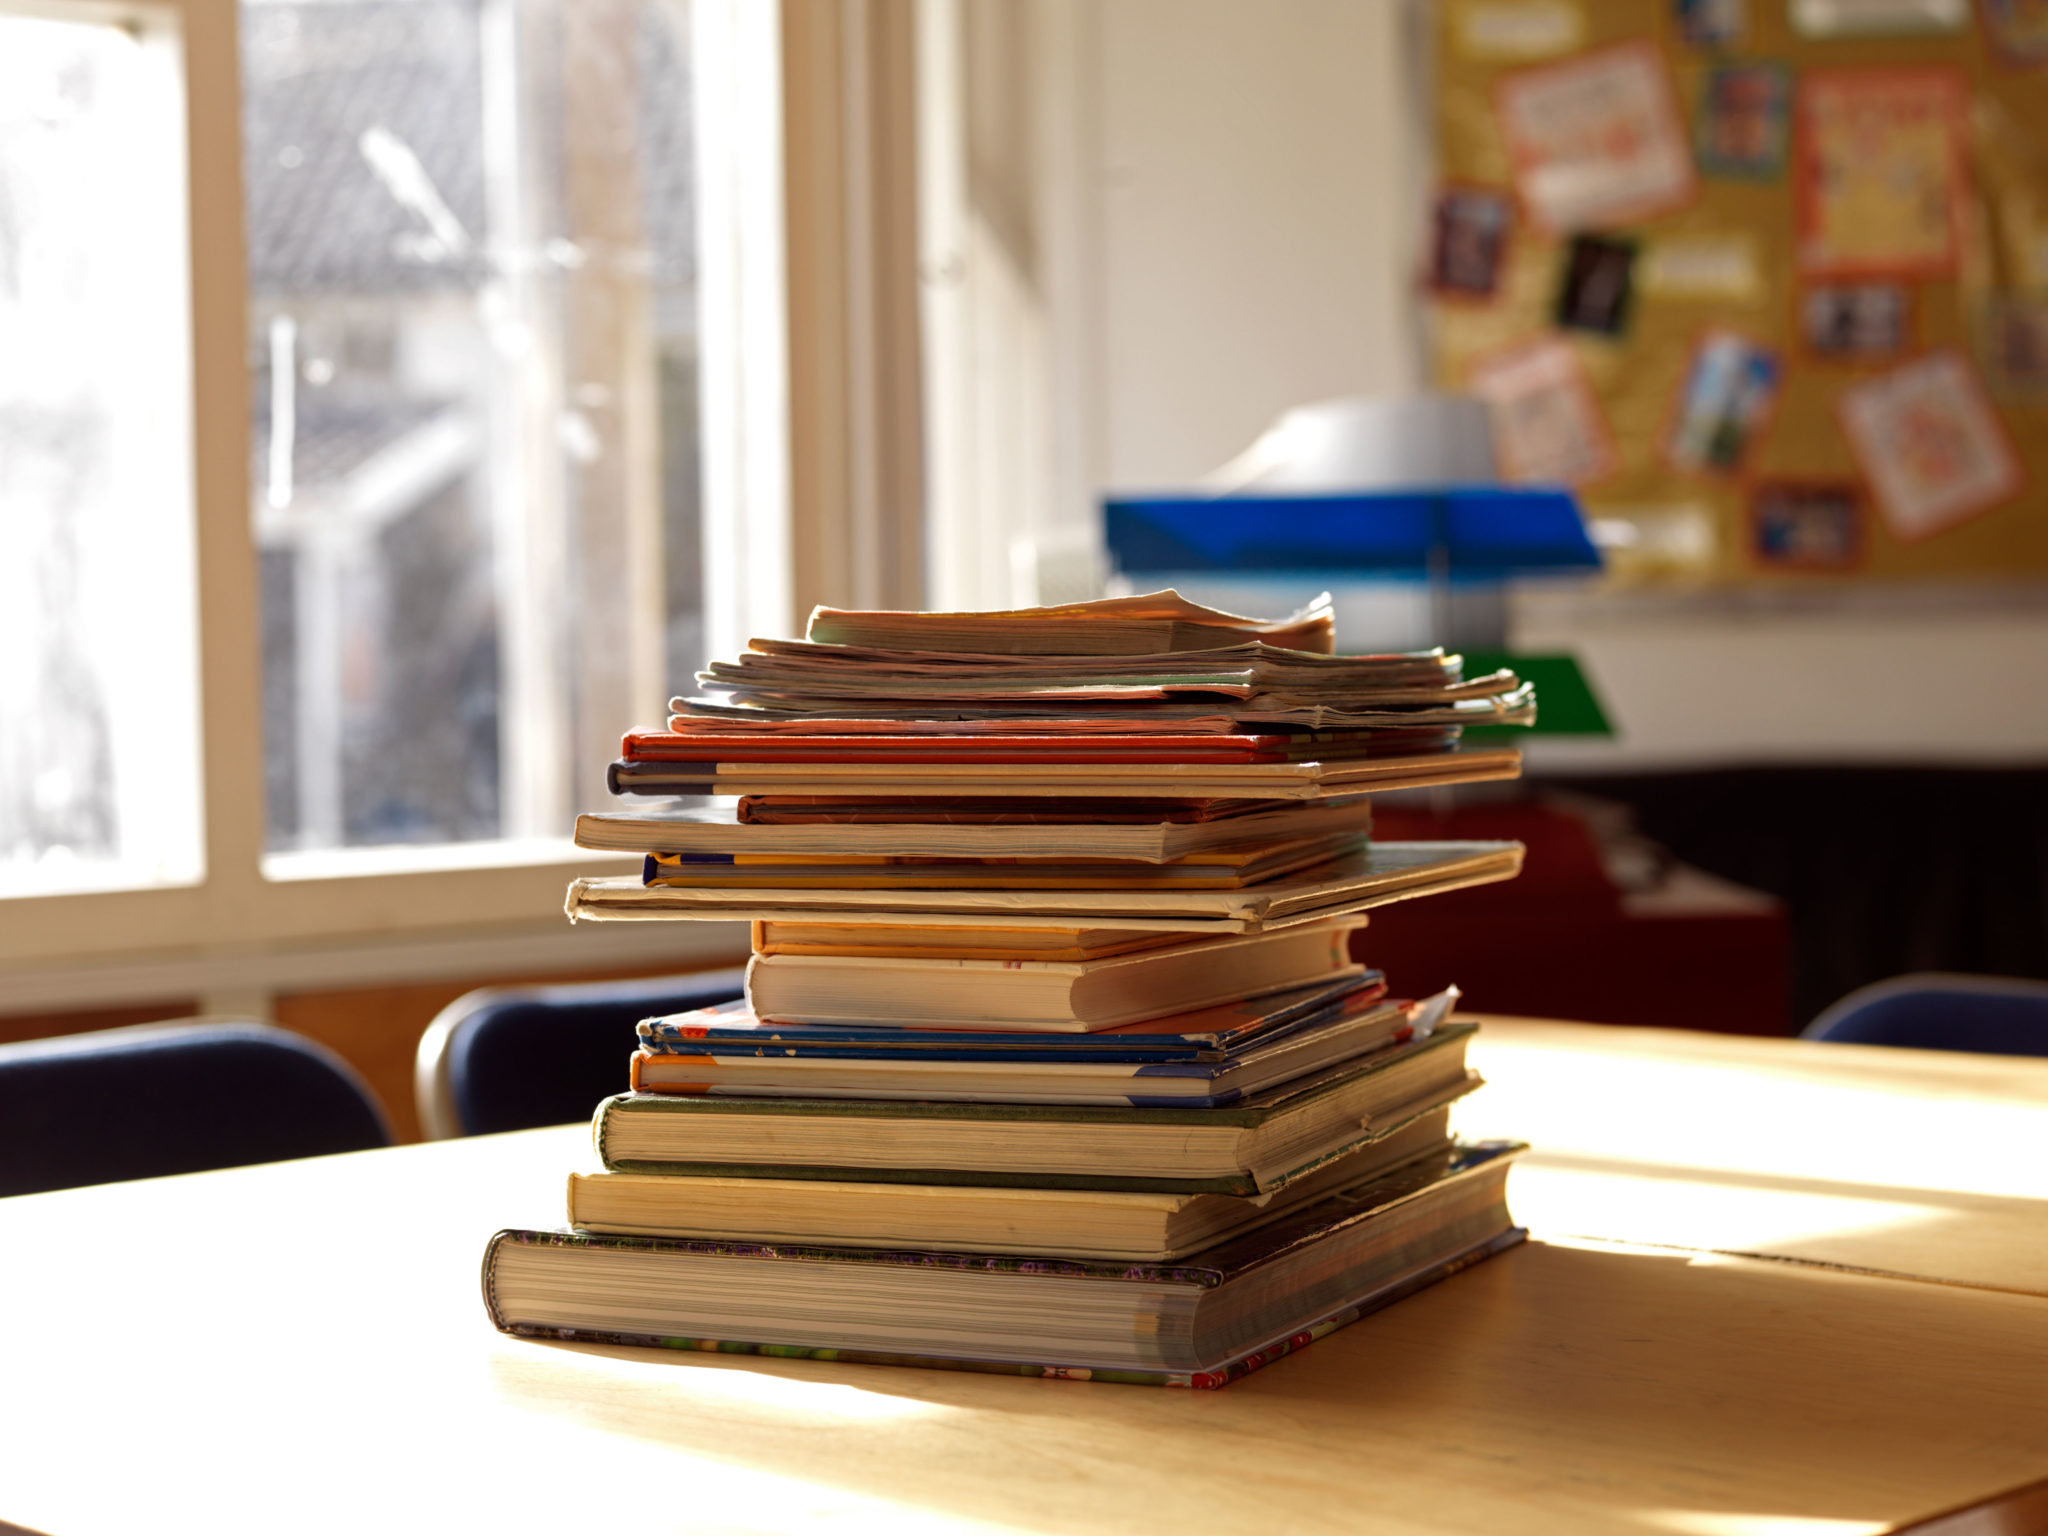 A pile of books in a classroom. Image: Alamy Stock Photo